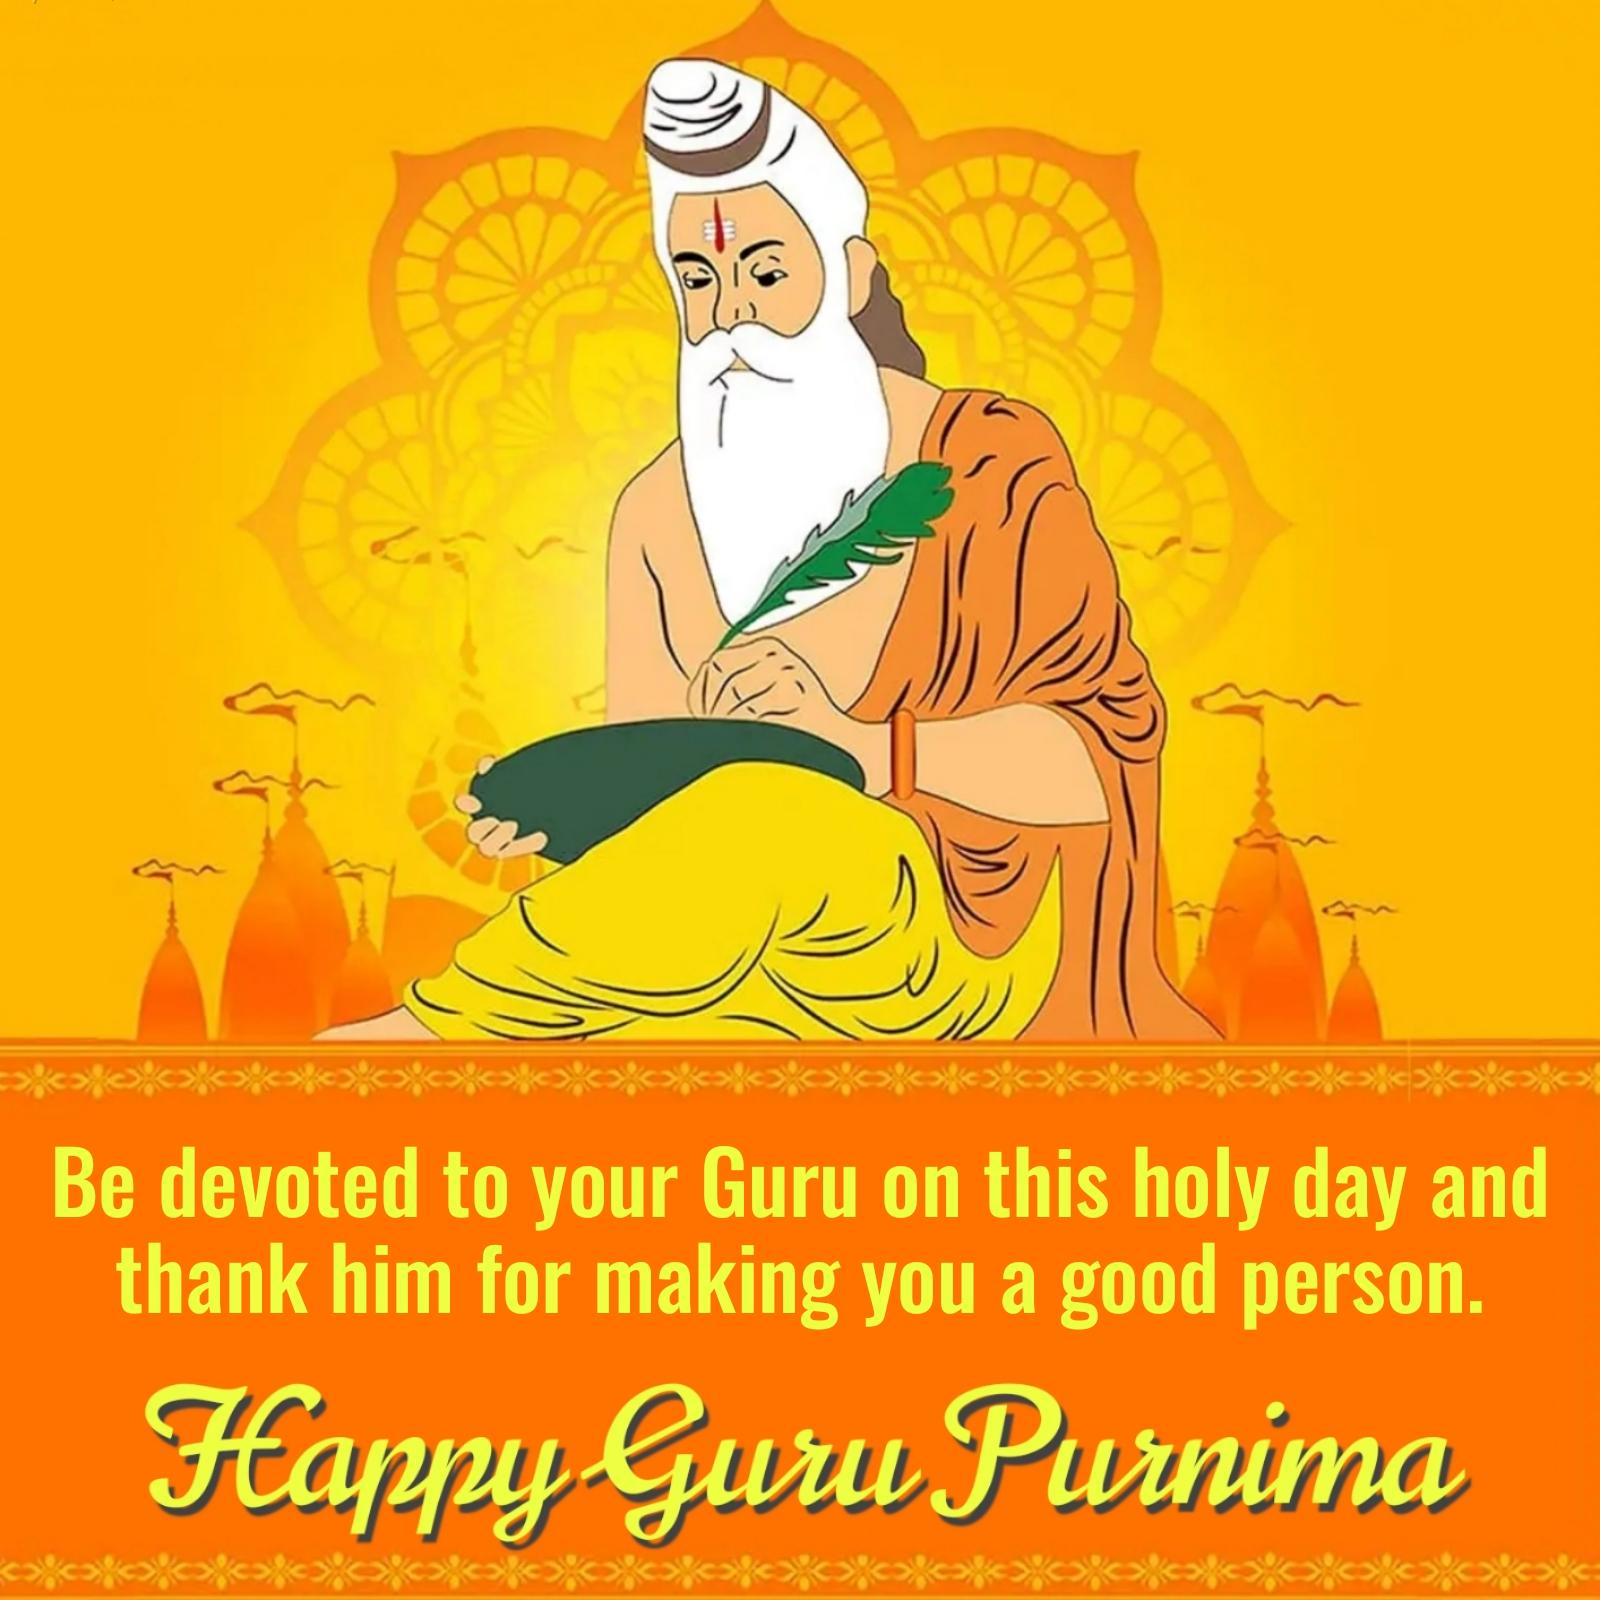 Be devoted to your Guru on this holy day and thank him